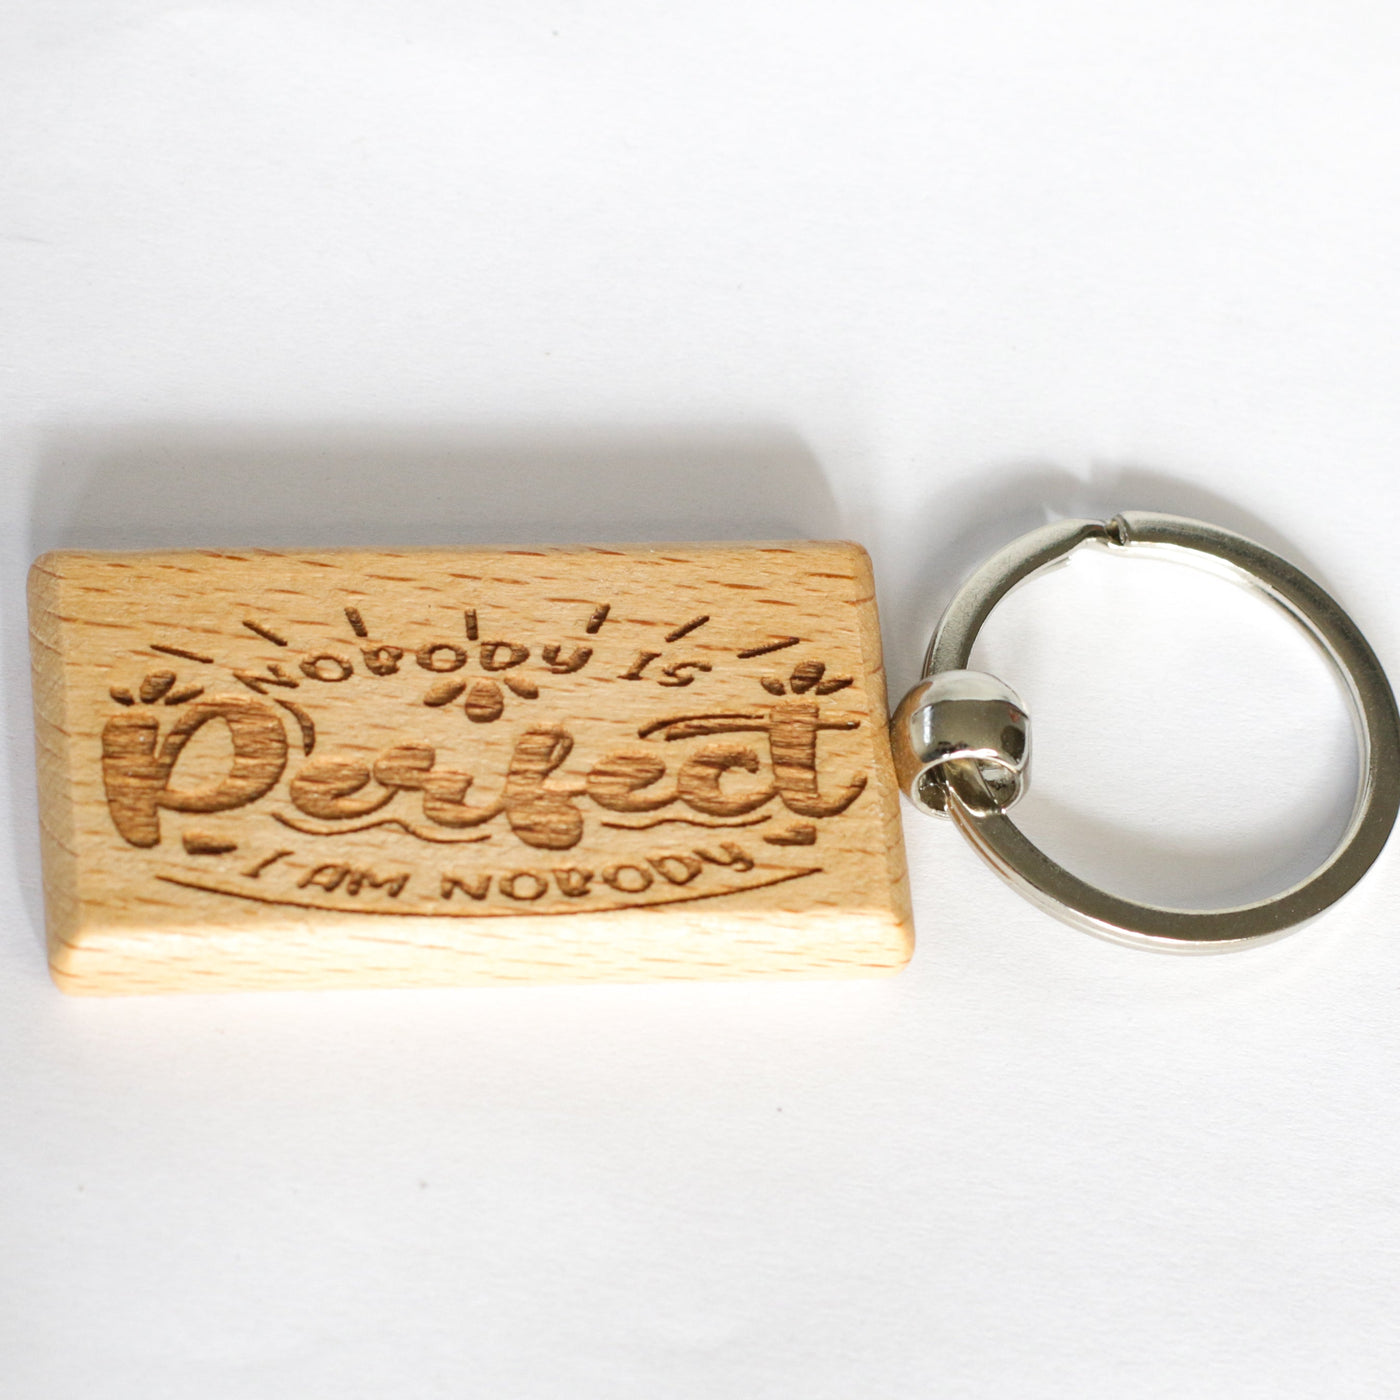 "NOBODY IS PERFECT, I AM NOBODY"- Engraved wooden Keyring - Exclusive Design